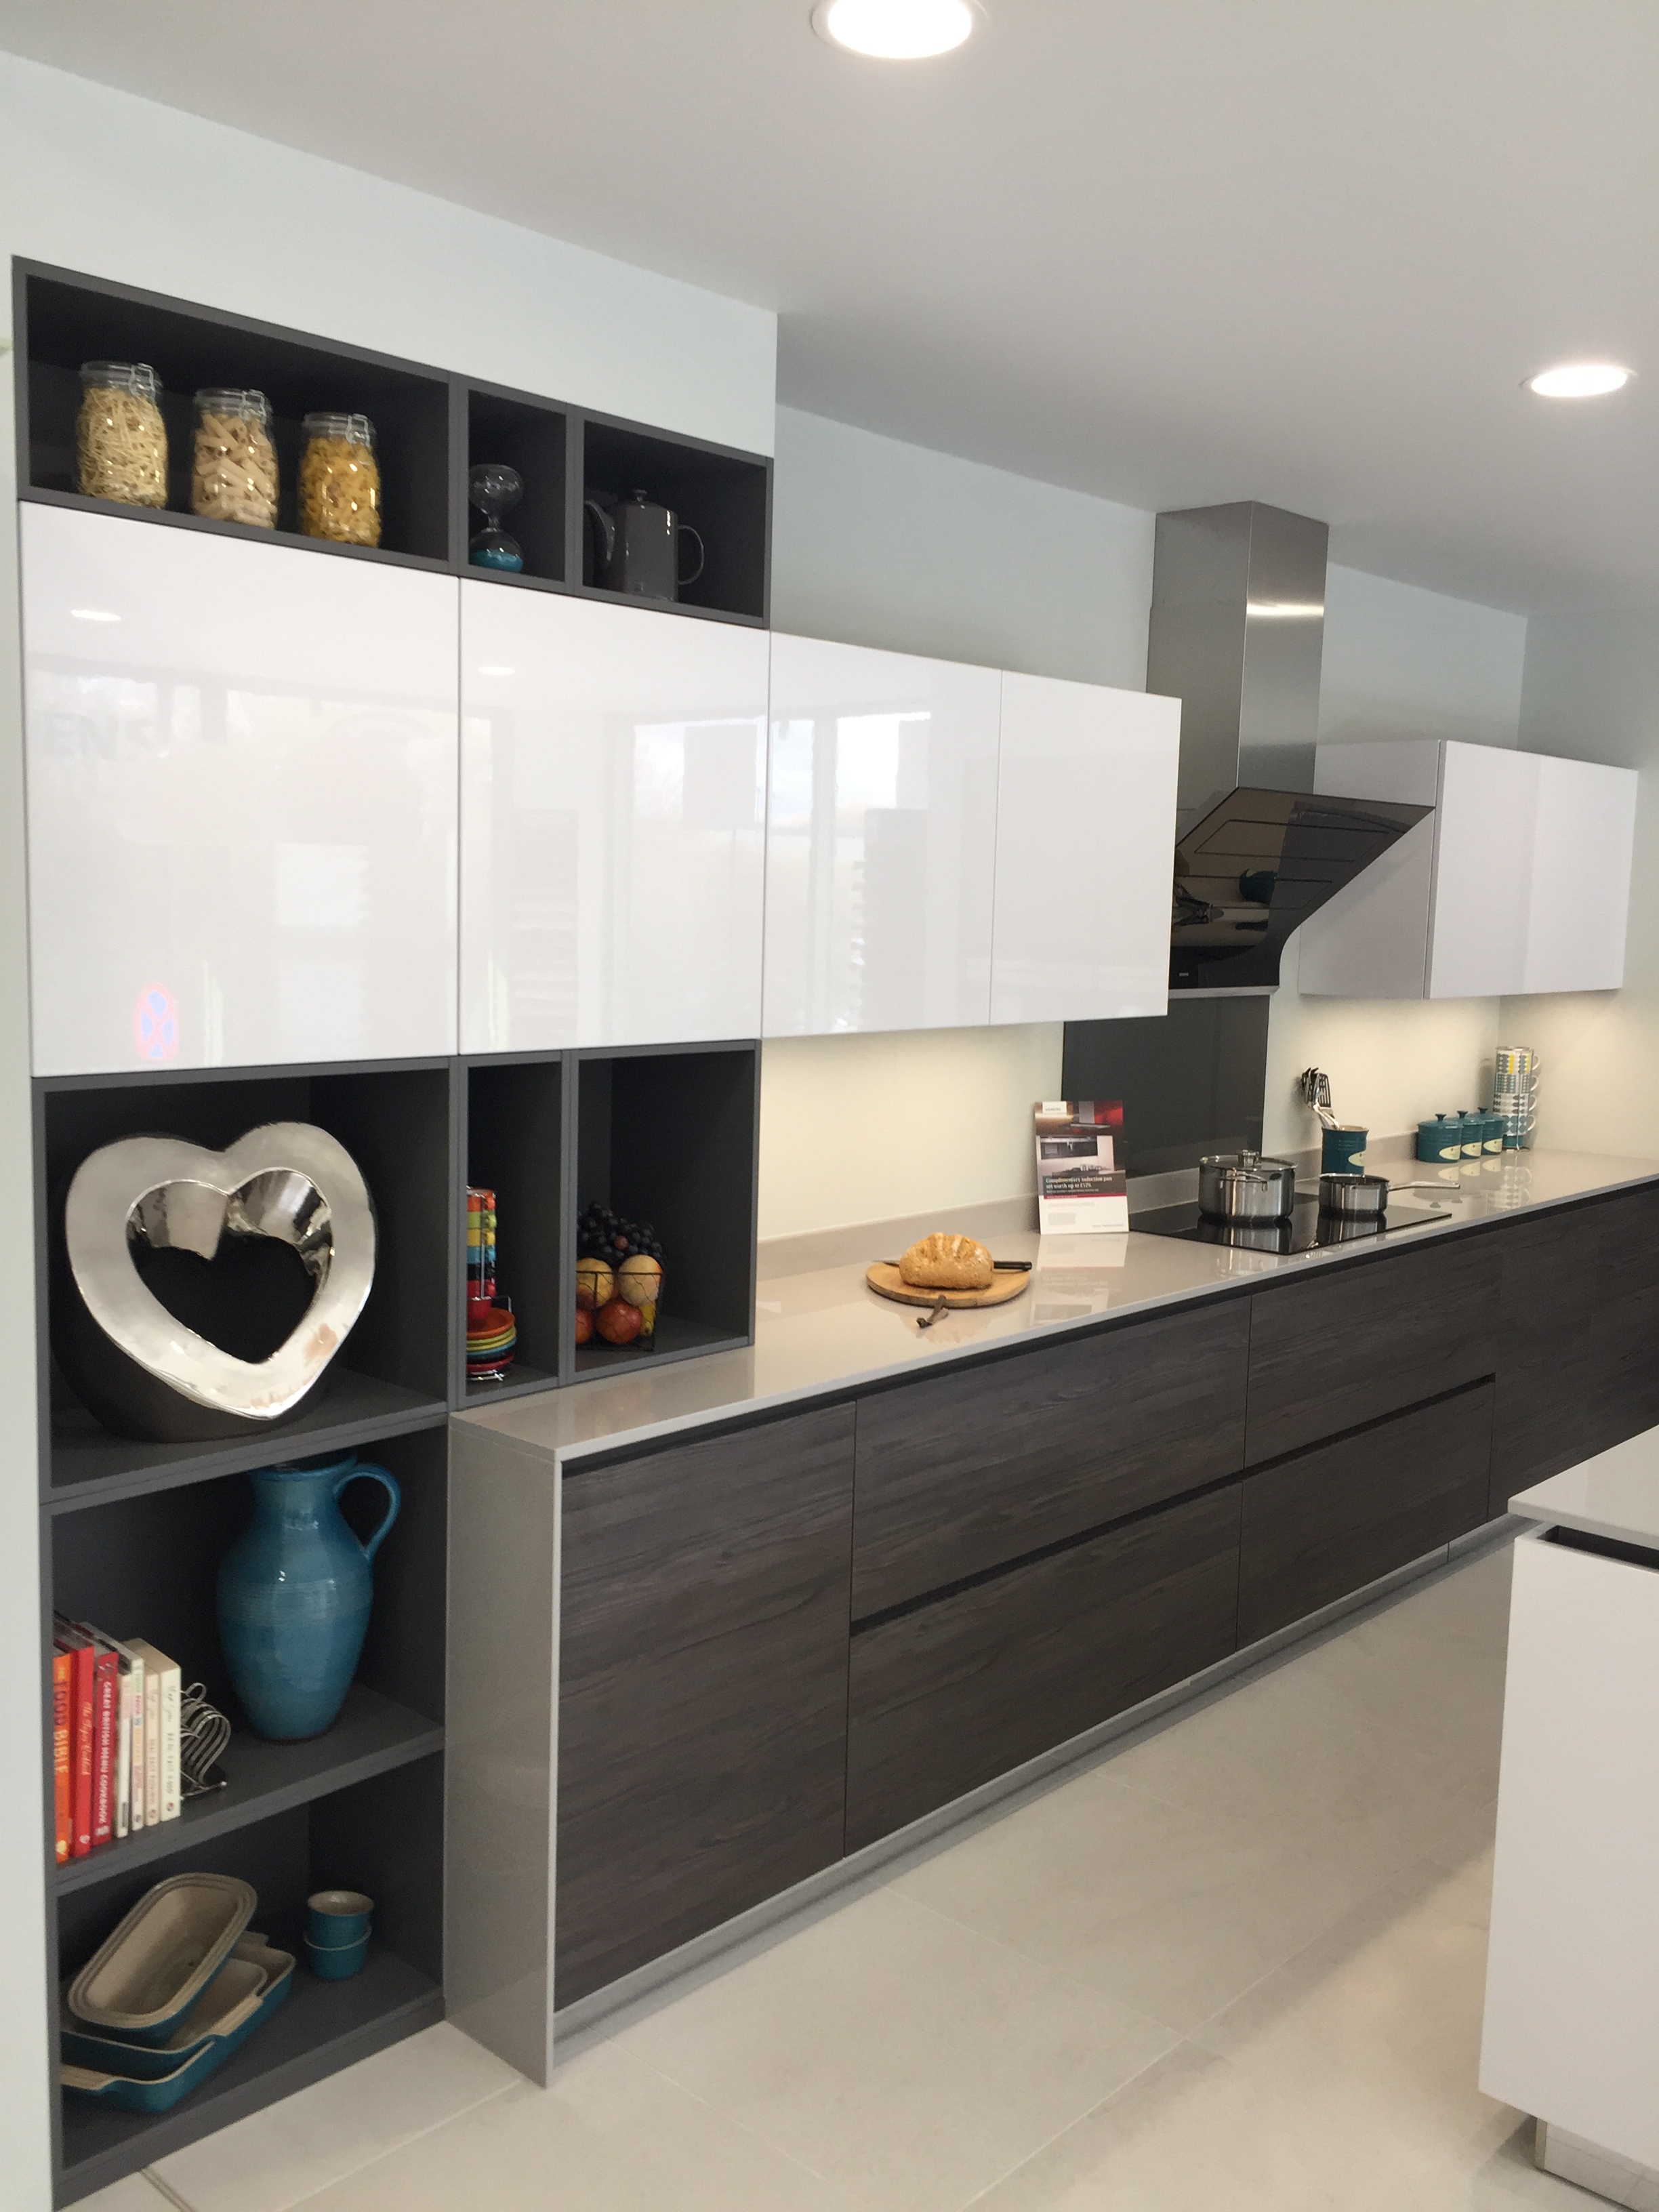 Concept Interiors in Sheffield open their new state of the art Kitchen